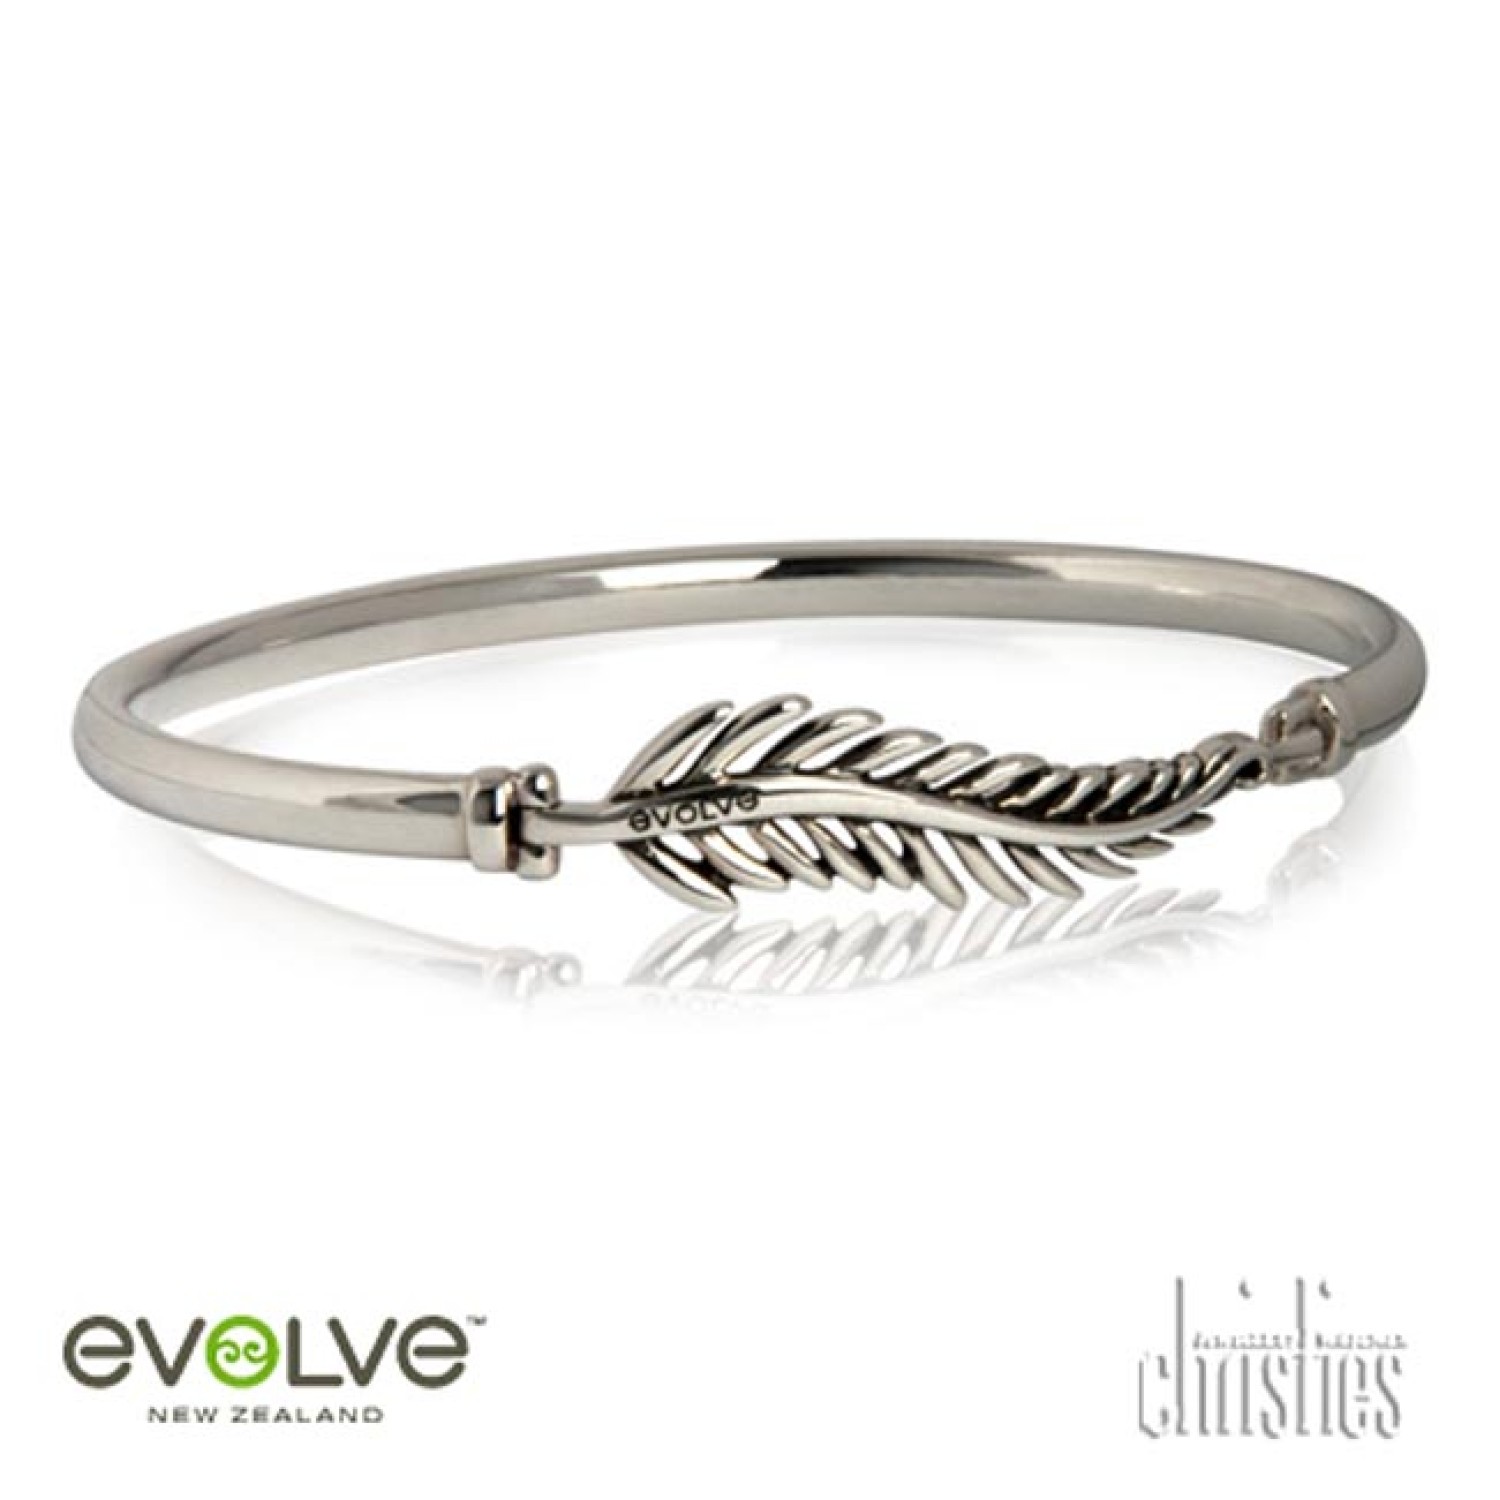 3B21047 Evolve Forever Fern Bangle. Evolve New Zealand Jewellery Forever Fern Bangle Evolves Forever Fern Bangle is a symbol of all that we treasure, celebrating eternal pride and admiration. Crafted in Sterling Silver Christies exclusive 5 year guarant @